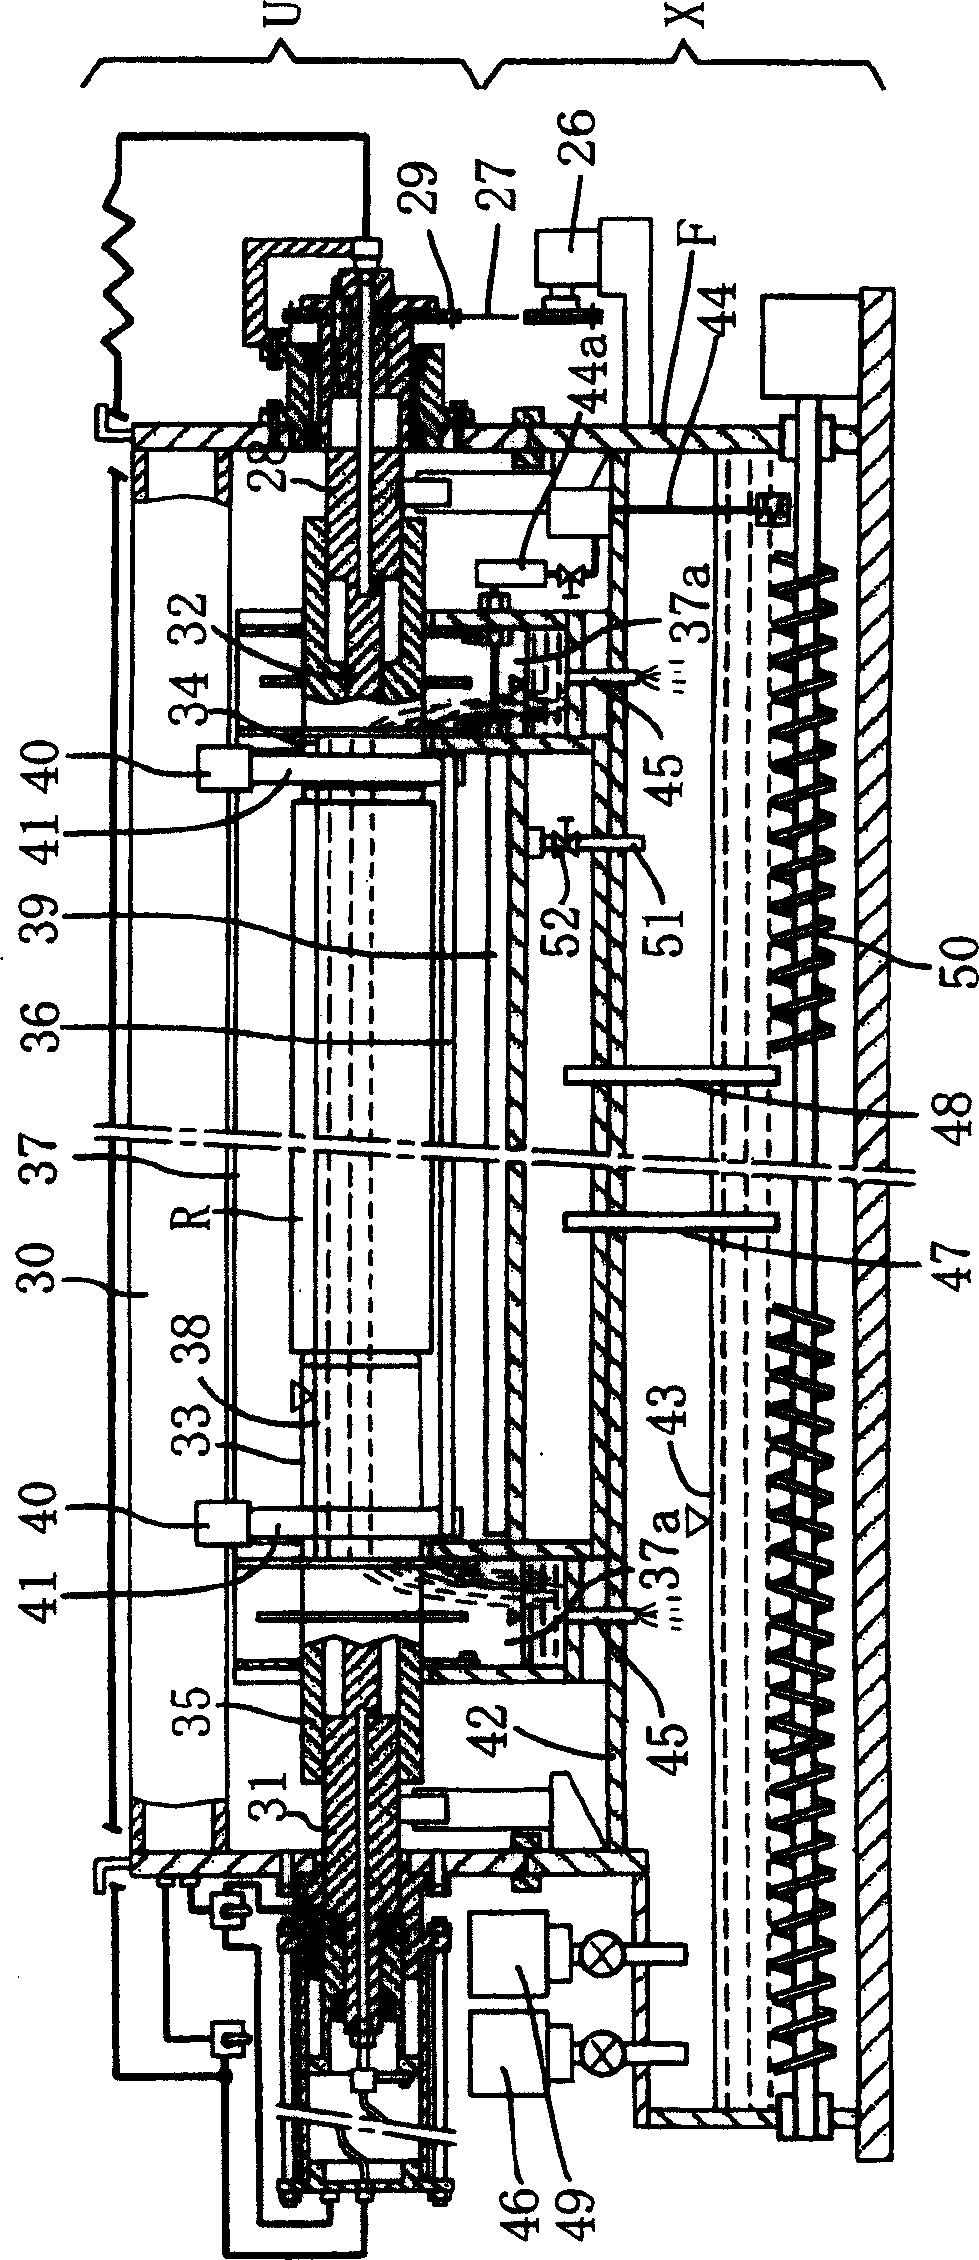 Method for electroplating and grinding plate rolls before forming pore